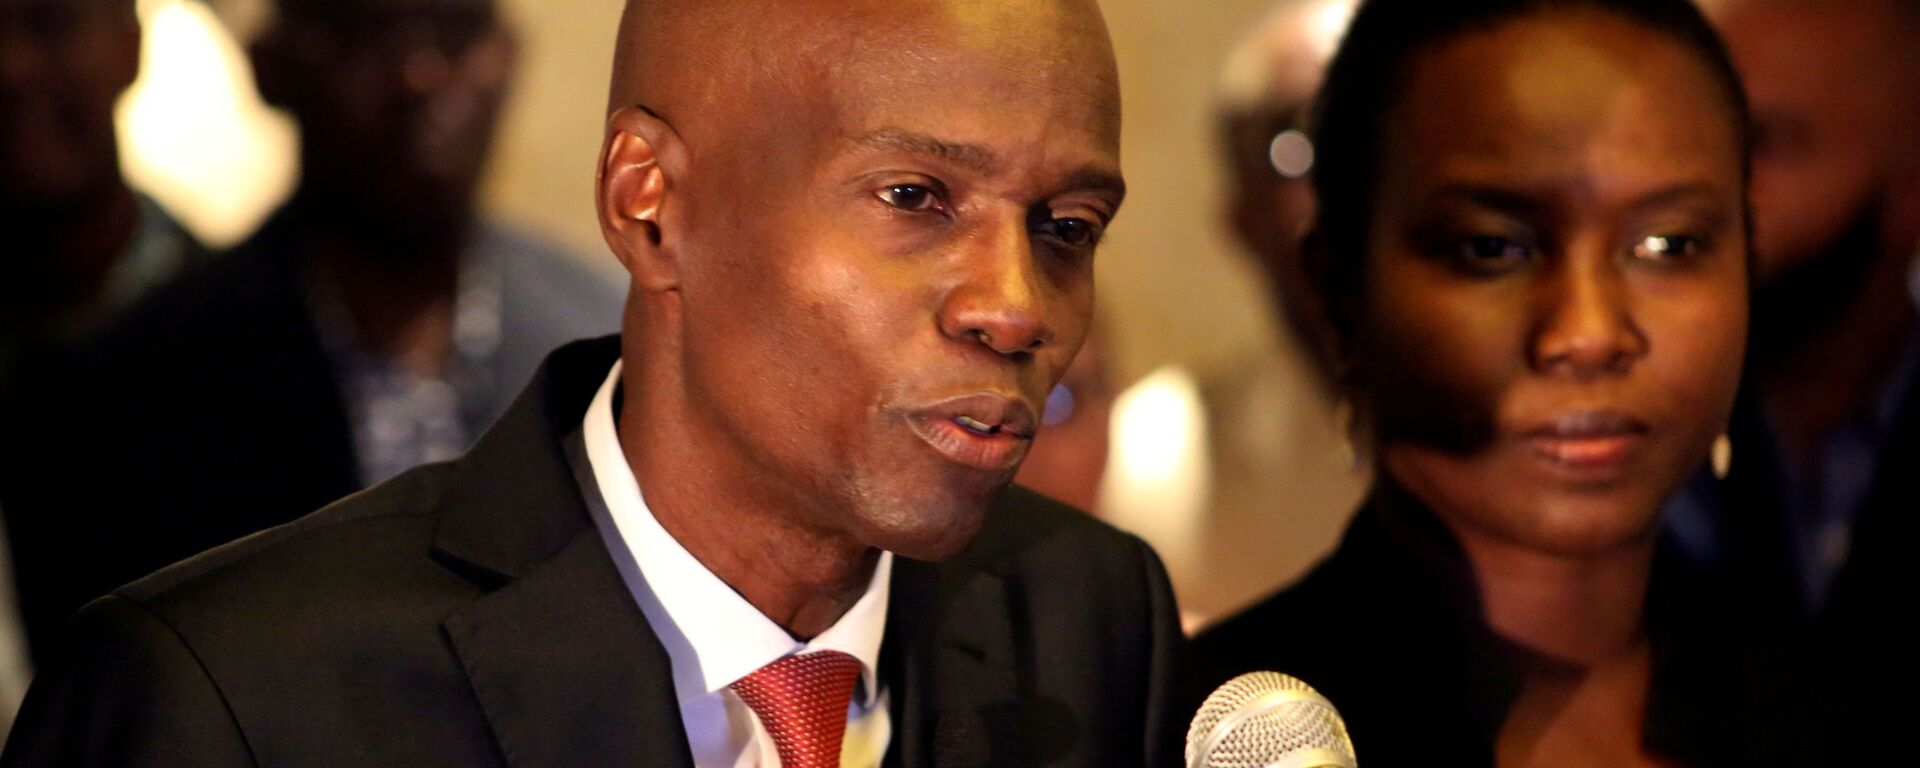 FILE PHOTO: Jovenel Moise addresses the media next to his wife Martine after winning the 2016 presidential election, in Port-au-Prince, Haiti. Picture taken November 28, 2016 - Sputnik International, 1920